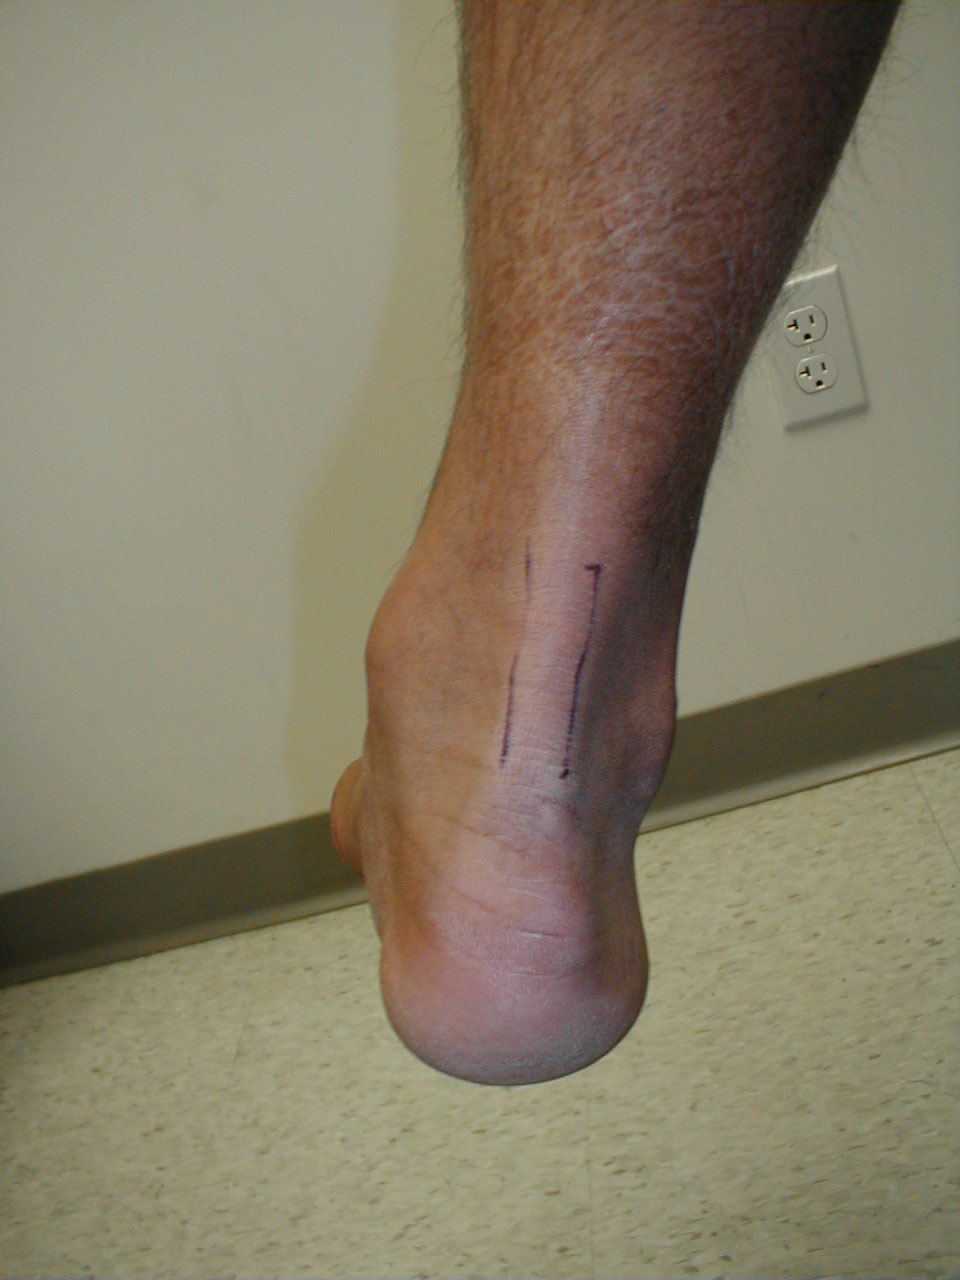 Achilles tendon:Tendon is outlined